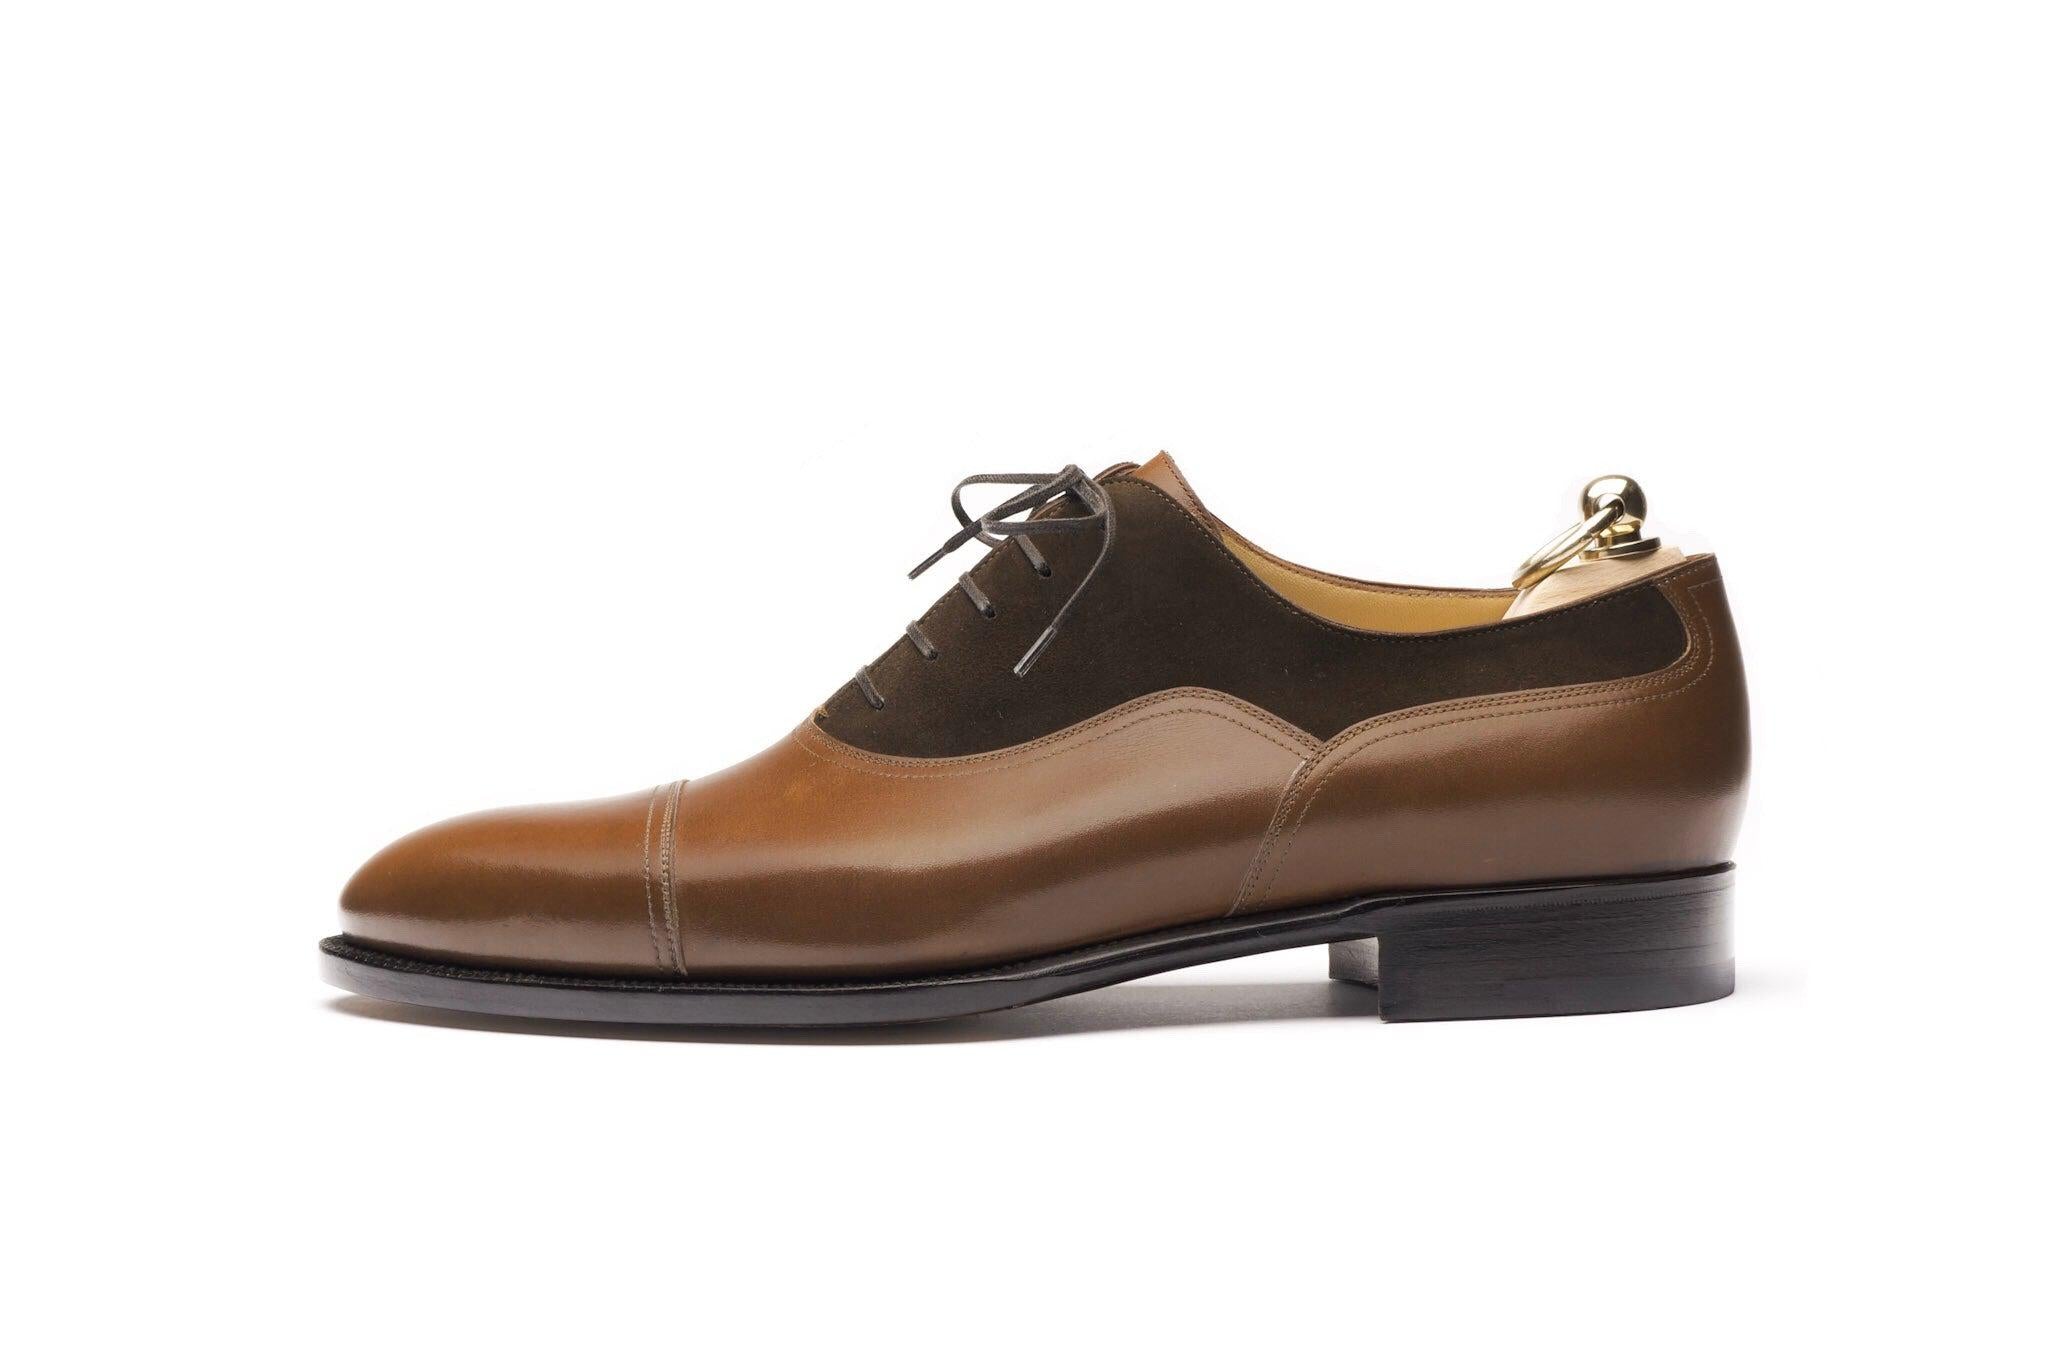 Stefano Bemer Style 6320 - Brown Calf / Brown Suede - Side Pic